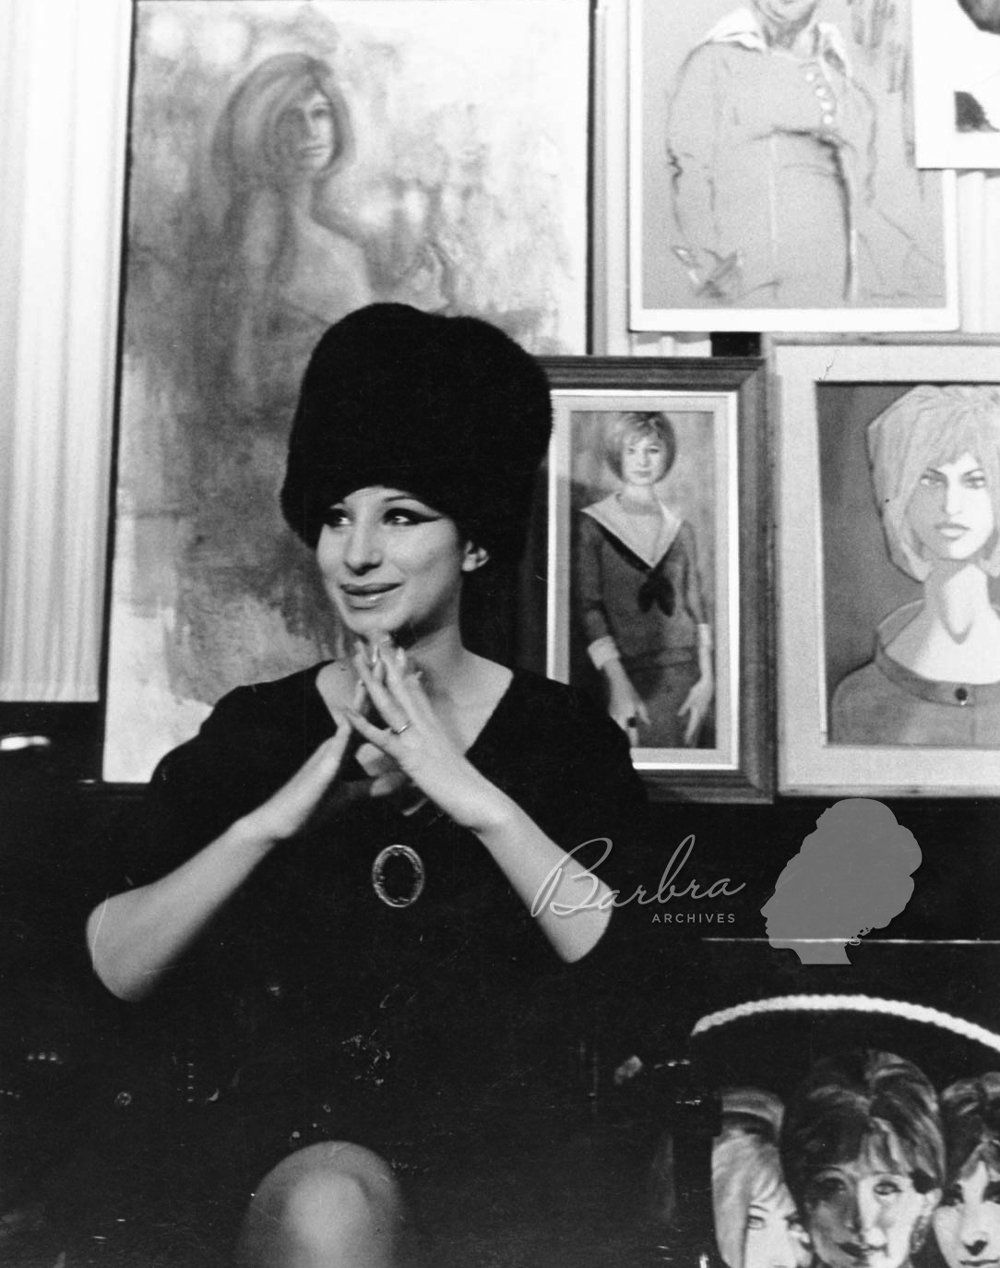 Streisand in dressing room, surrounded by fan art.